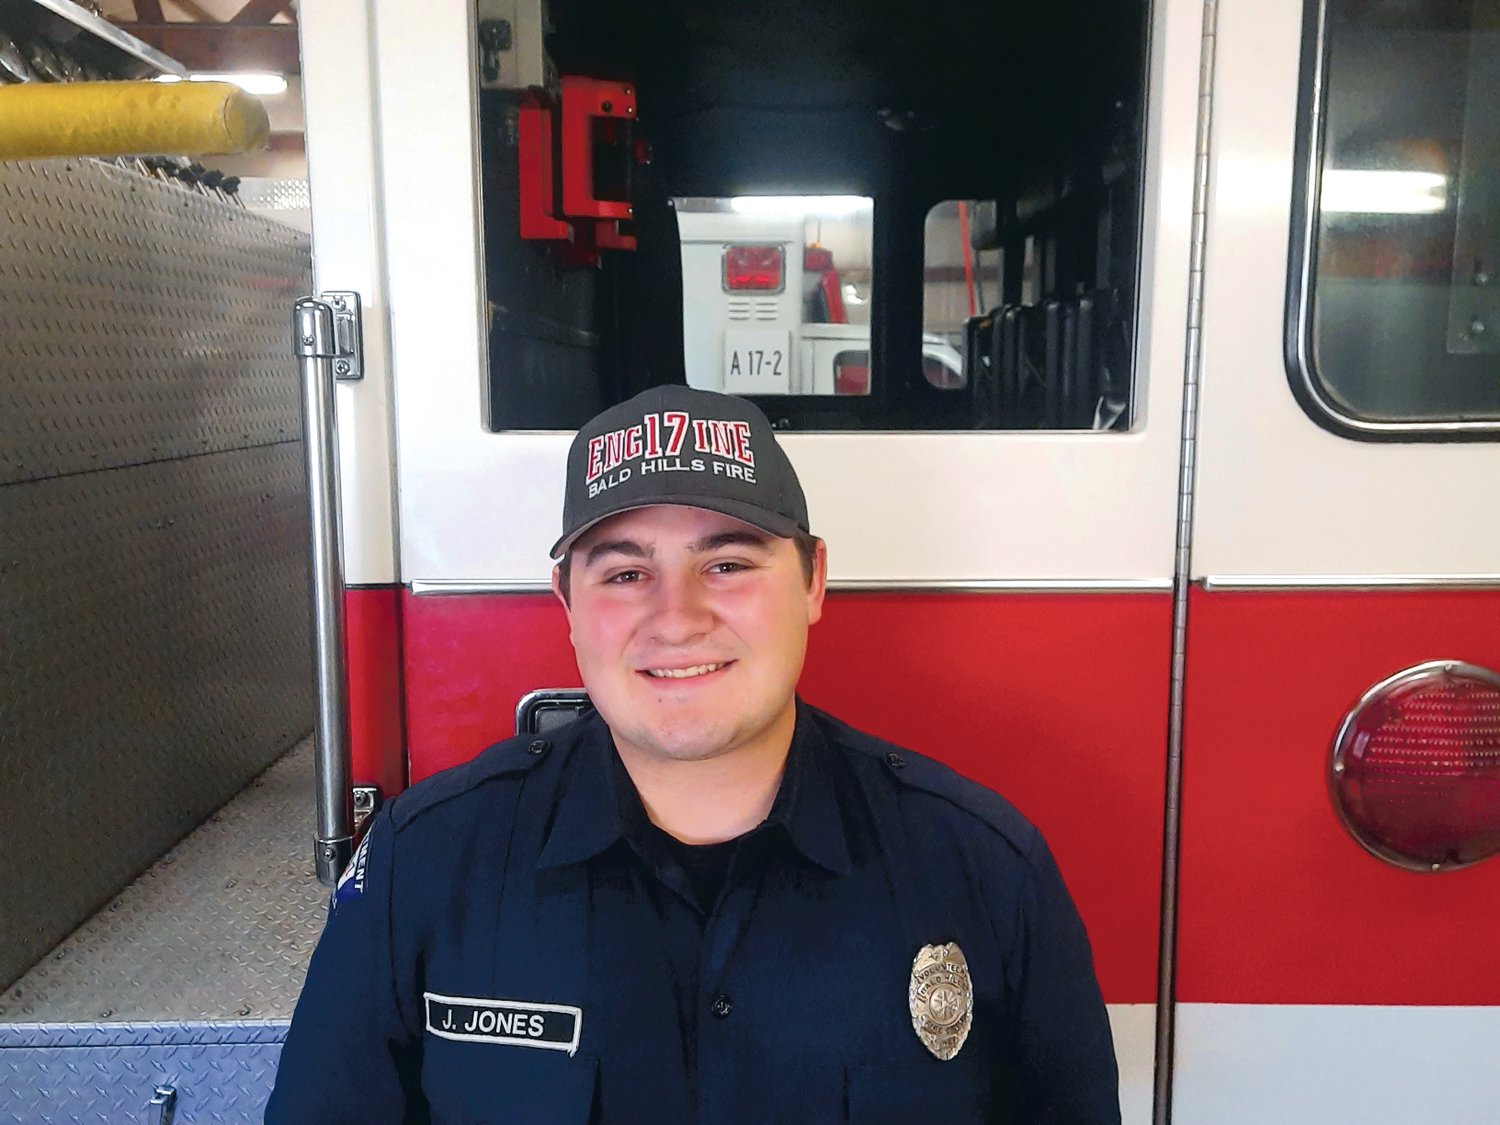 The Bald Hills Fire Department named Jacob Jones as this year’s Volunteer Firefighter of the Year.